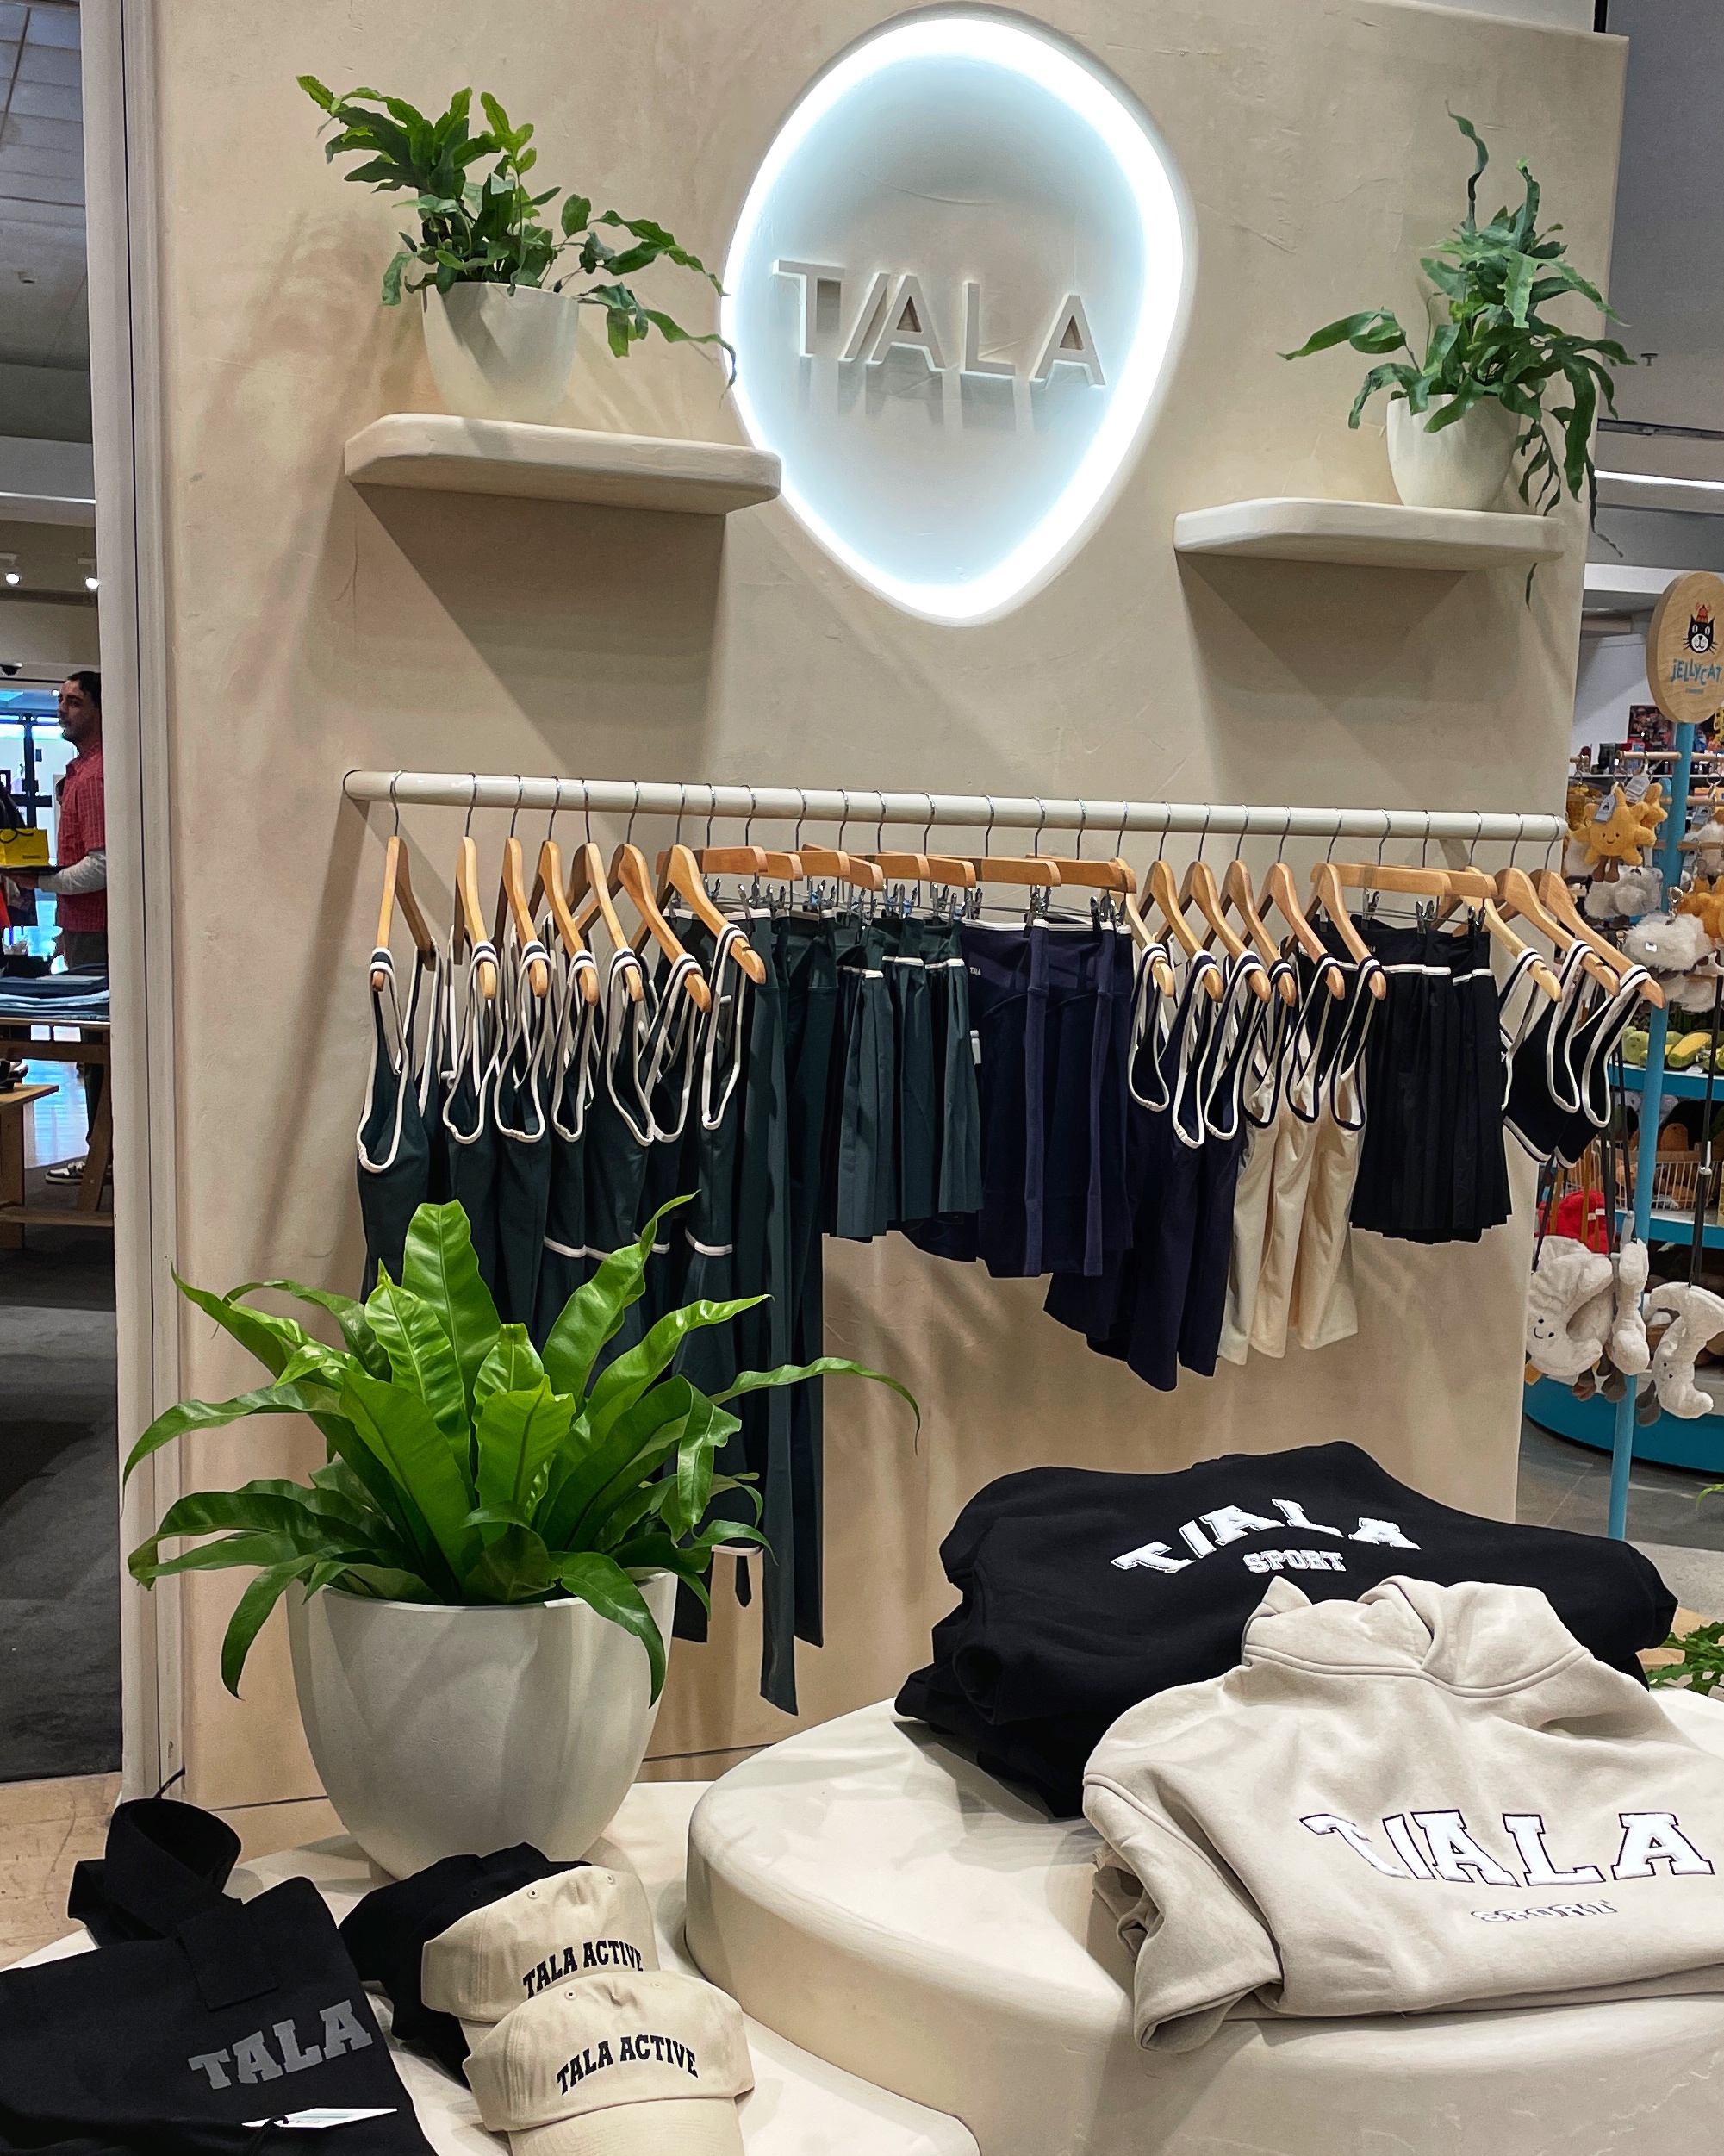 Popular activewear brand Tala launches physical shop in Selfridges